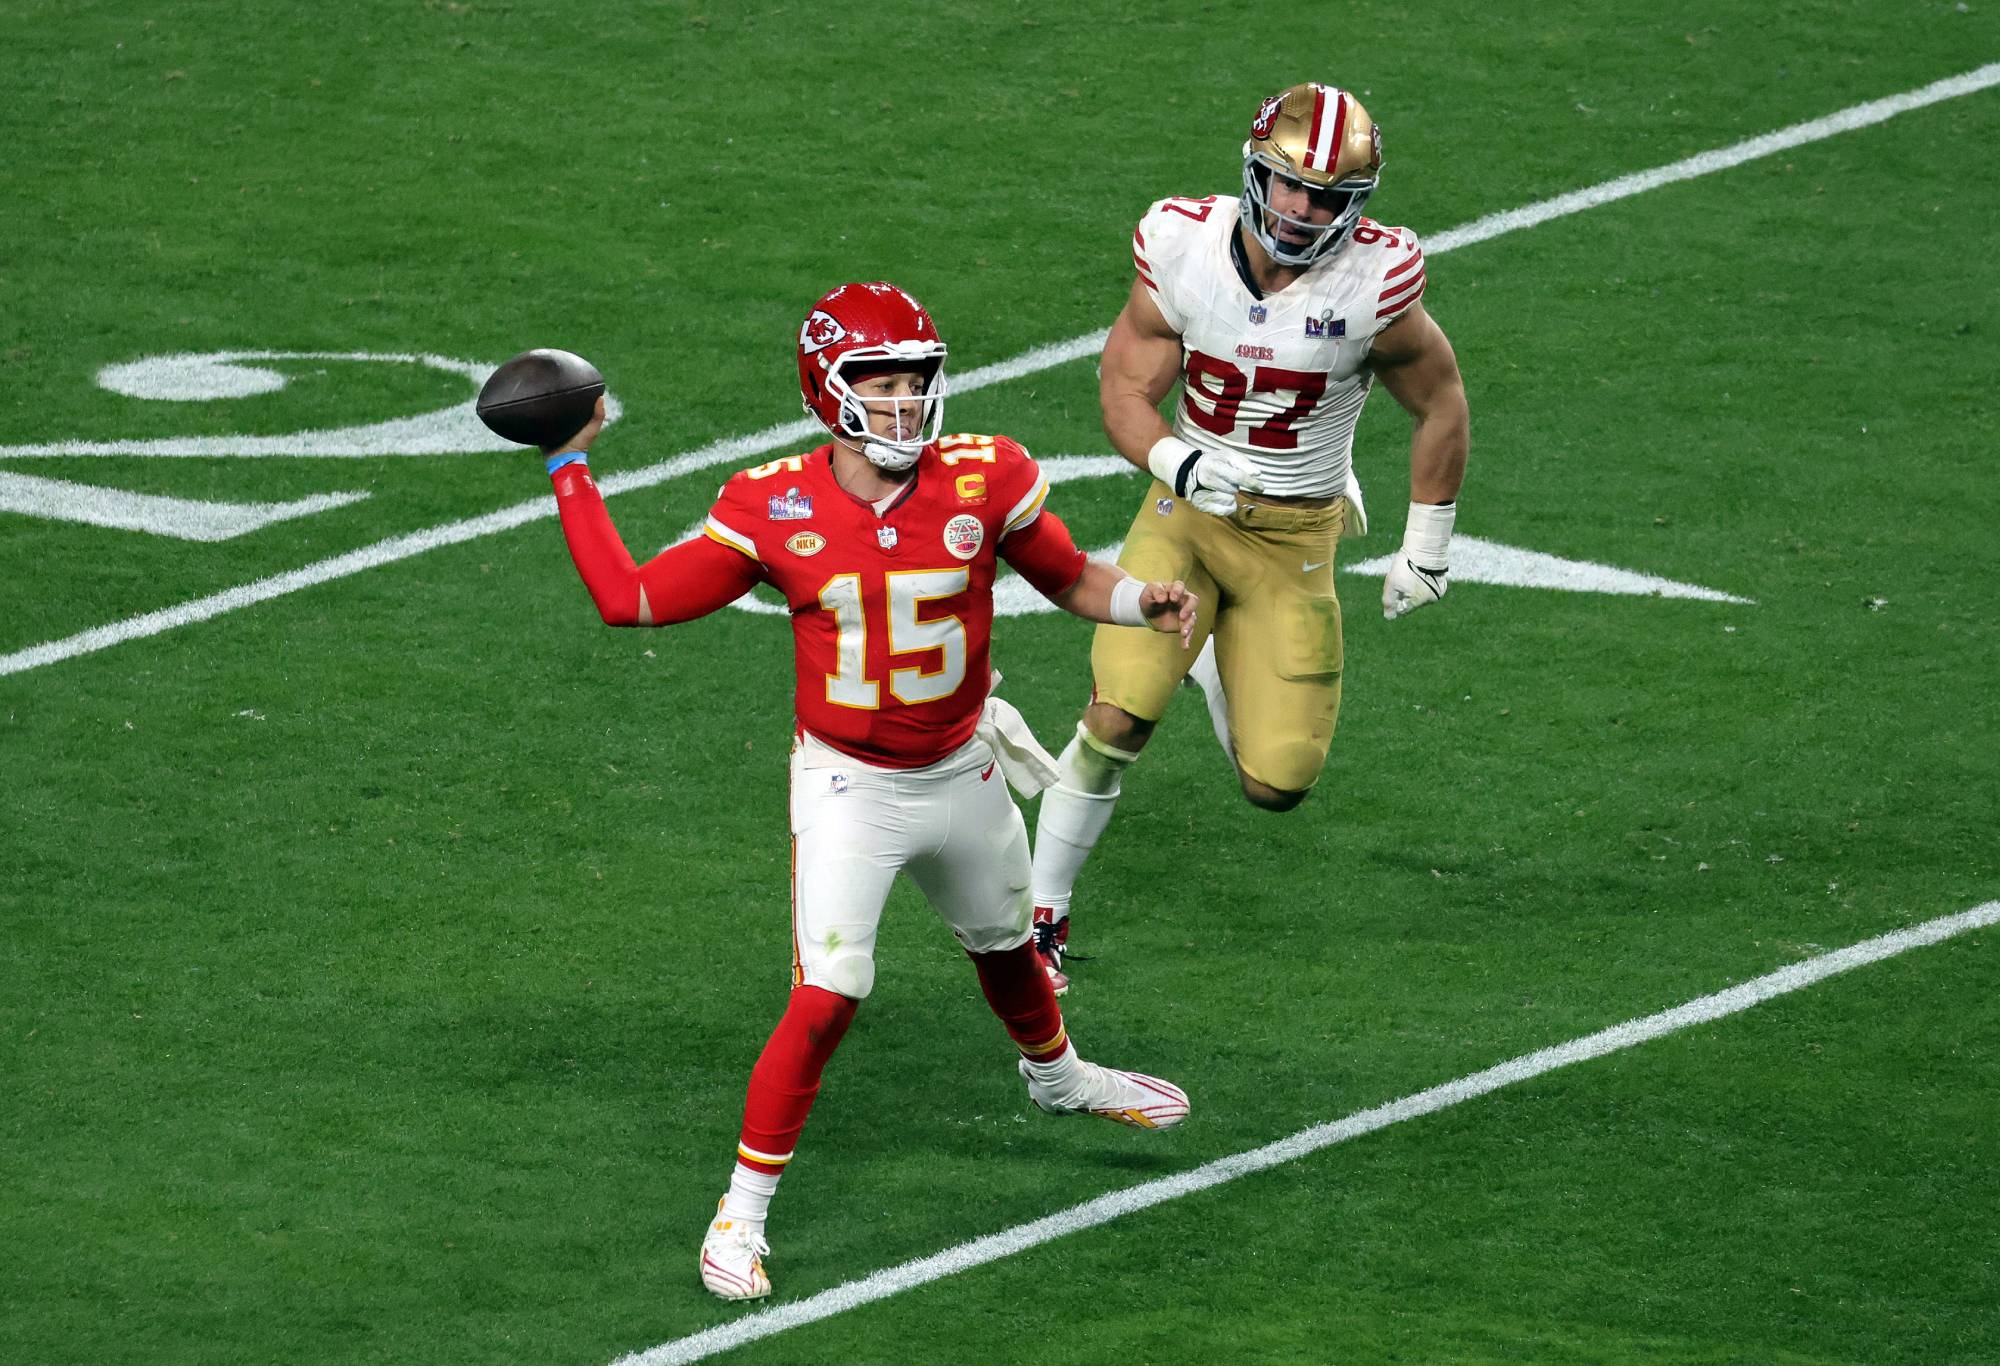 : Patrick Mahomes #15 of the Kansas City Chiefs looks to pass in the fourth quarter against Nick Bosa #97 of the San Francisco 49ers during Super Bowl LVIII at Allegiant Stadium on February 11, 2024 in Las Vegas, Nevada. (Photo by Ethan Miller/Getty Images)